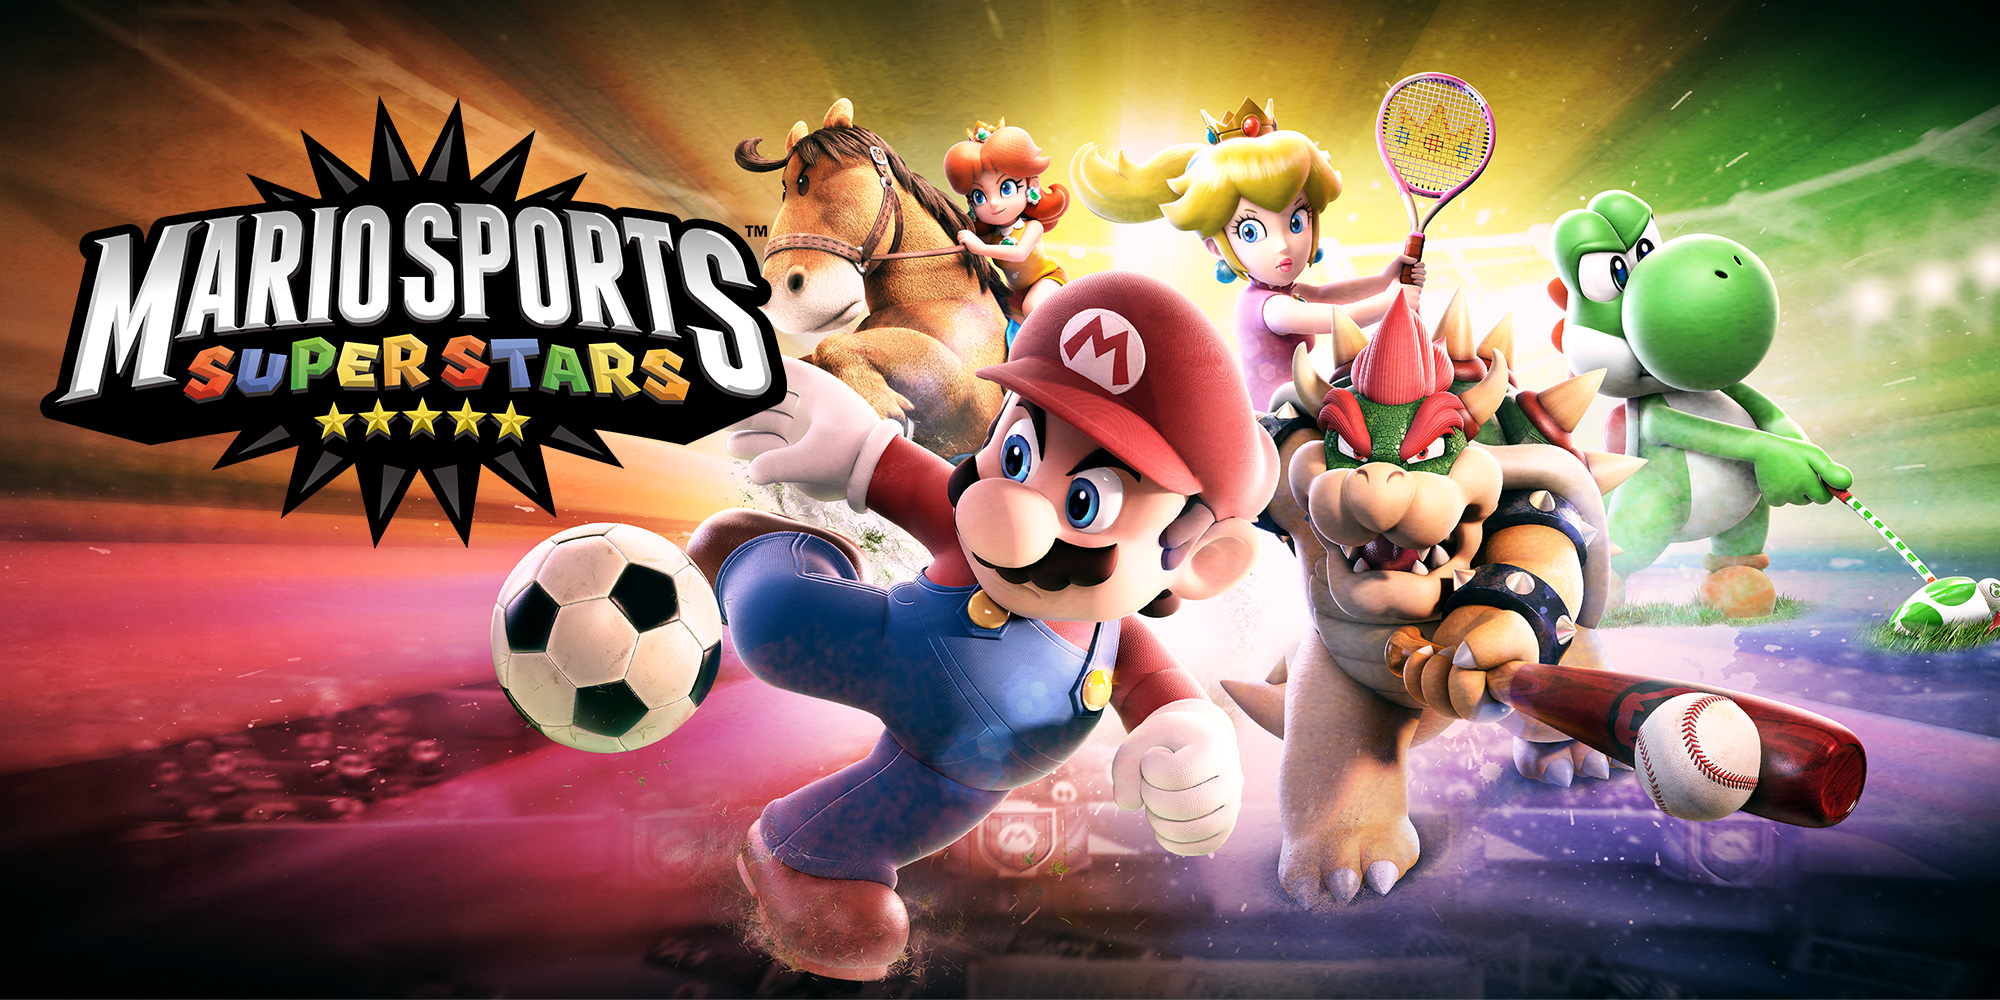 Mario Sports Superstars (2017) Princess peach in - The princess is in  this Blog